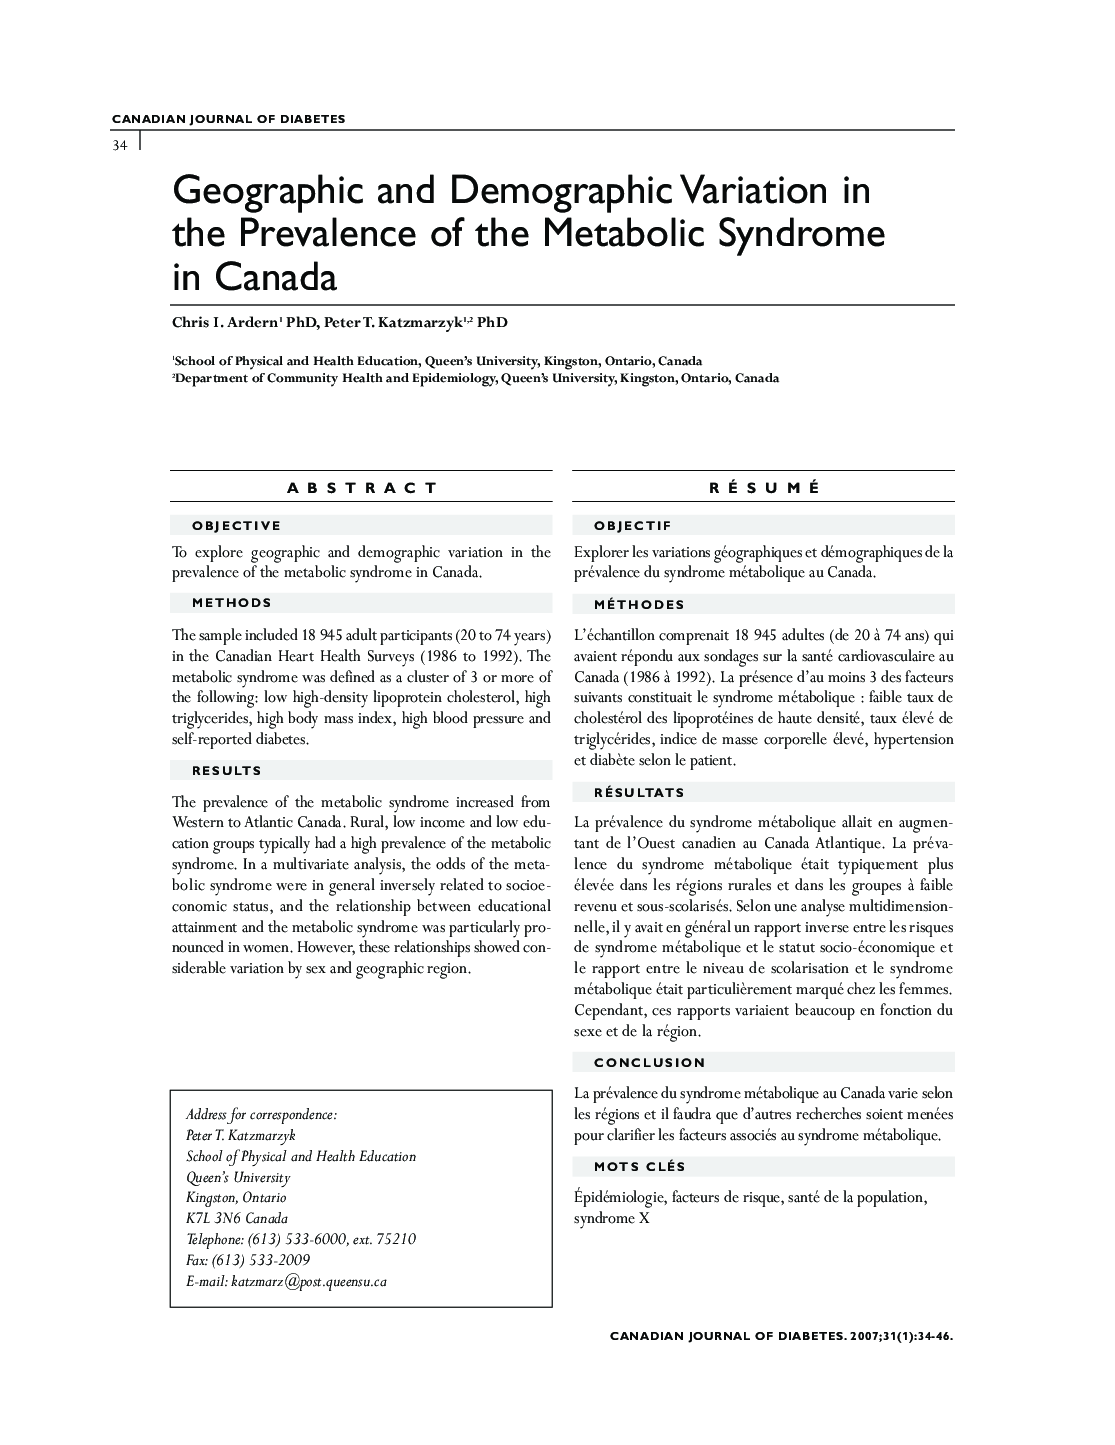 Geographic and Demographic Variation in the Prevalence of the Metabolic Syndrome in Canada